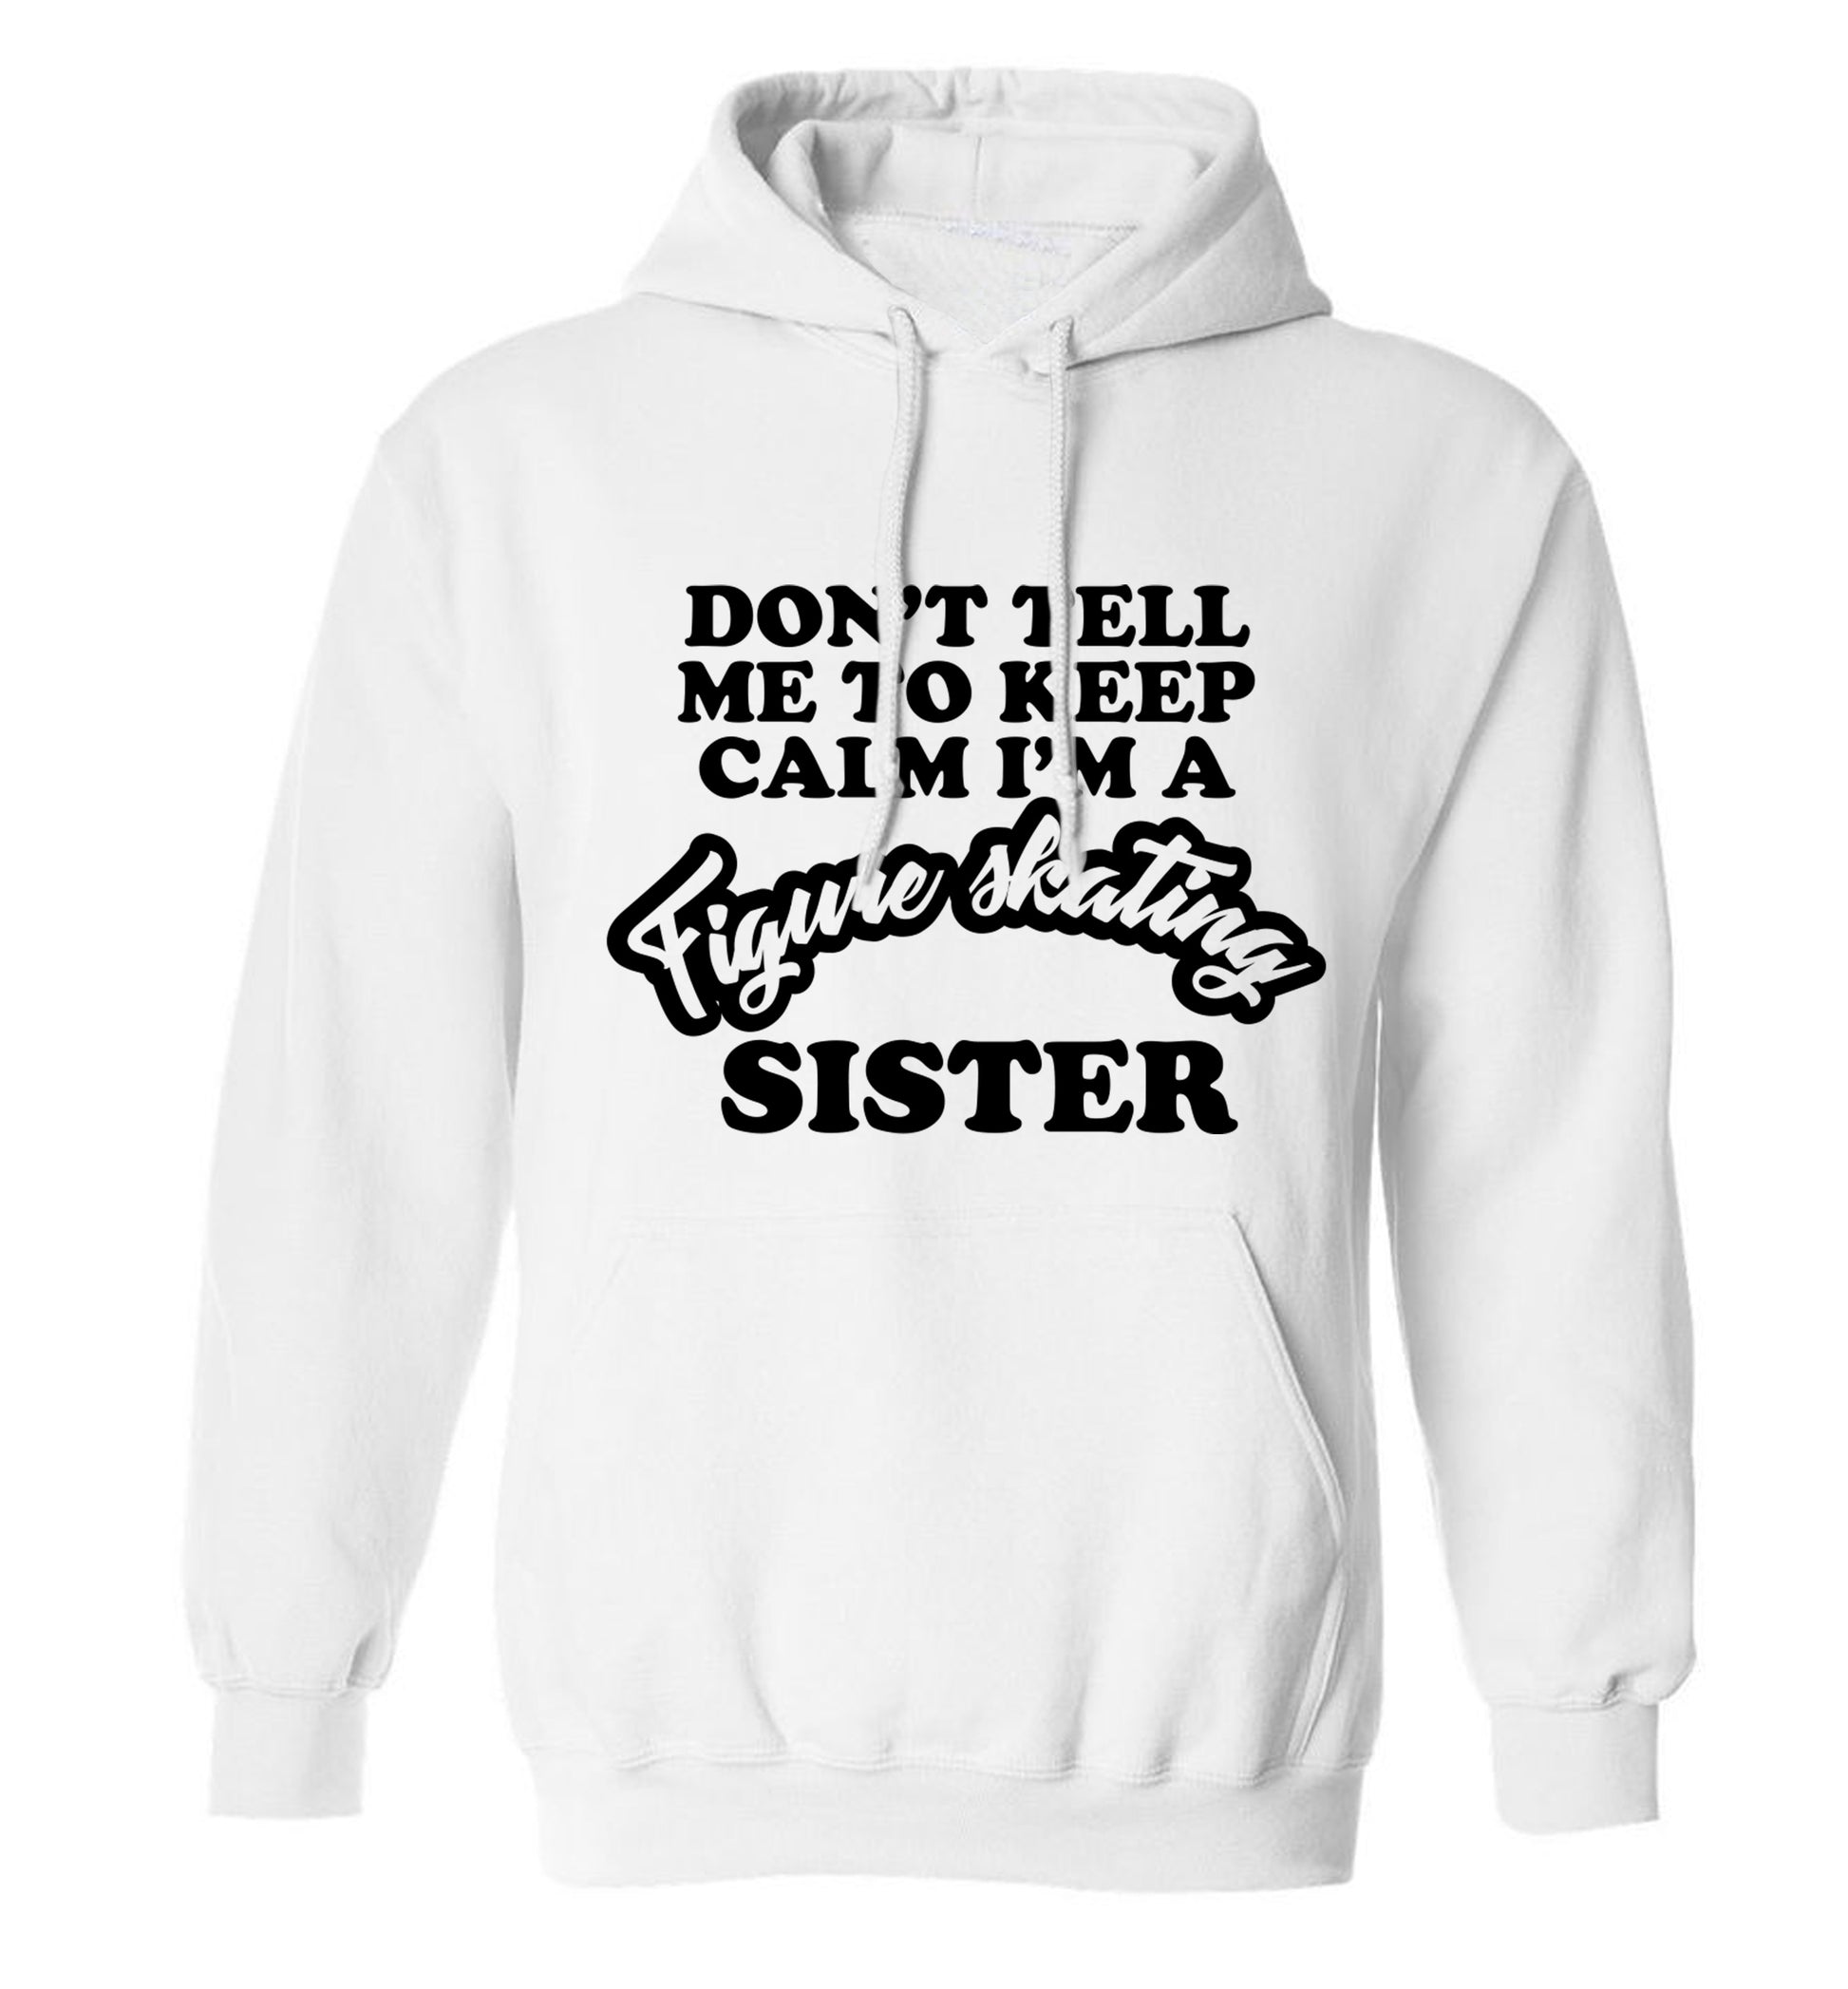 Don't tell me to keep calm I'm a figure skating sister adults unisexwhite hoodie 2XL